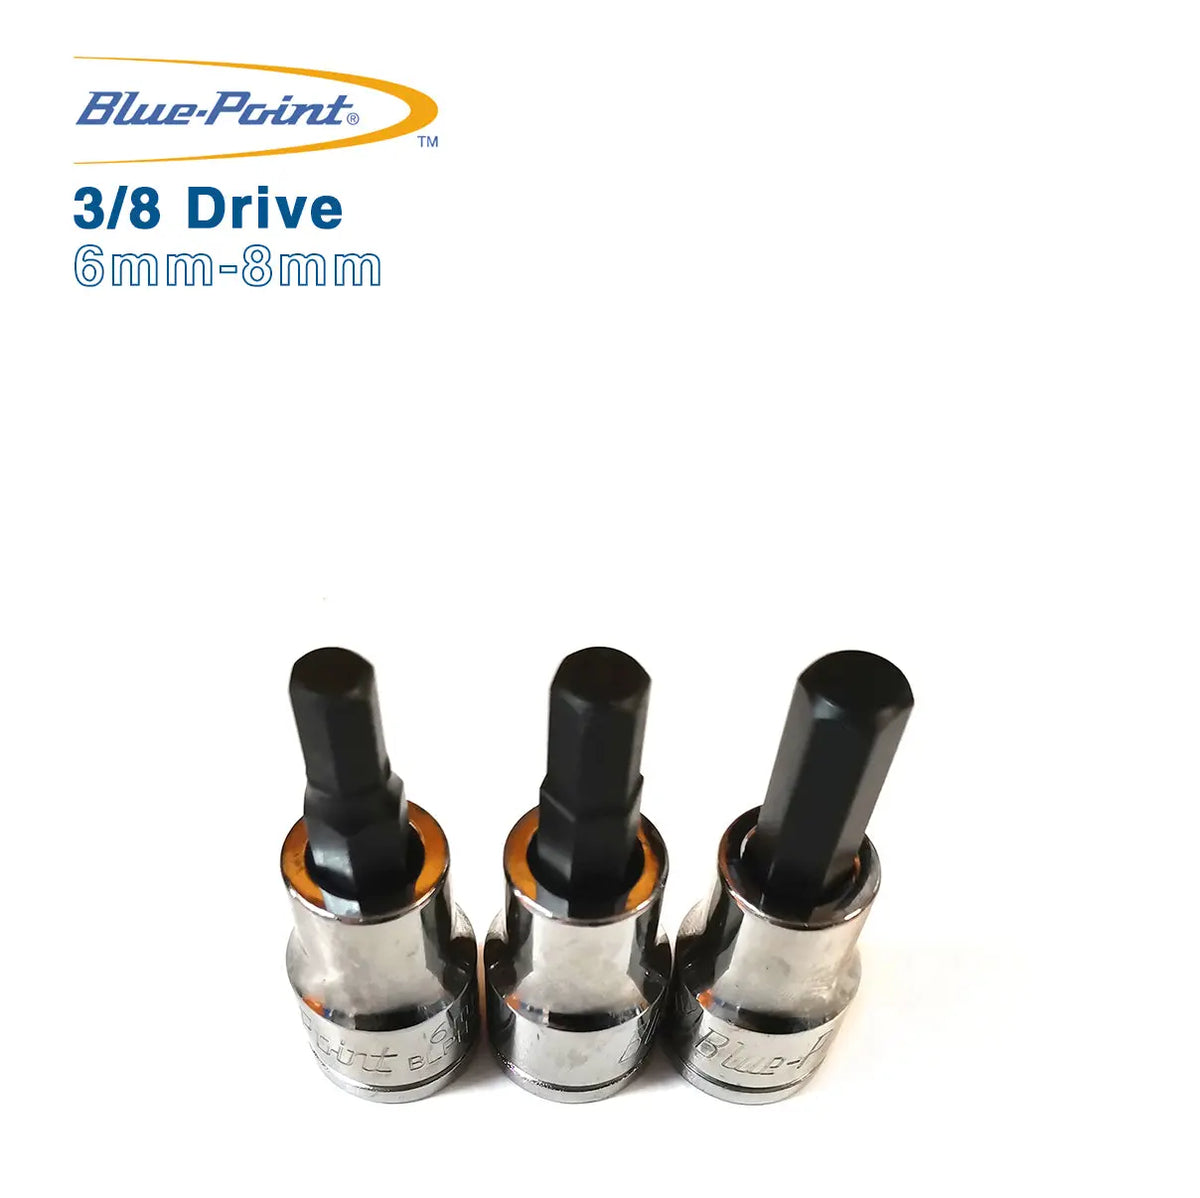 Blue Point 3/8 Drive Hex Sockets 6mm - 8mm BluePoint